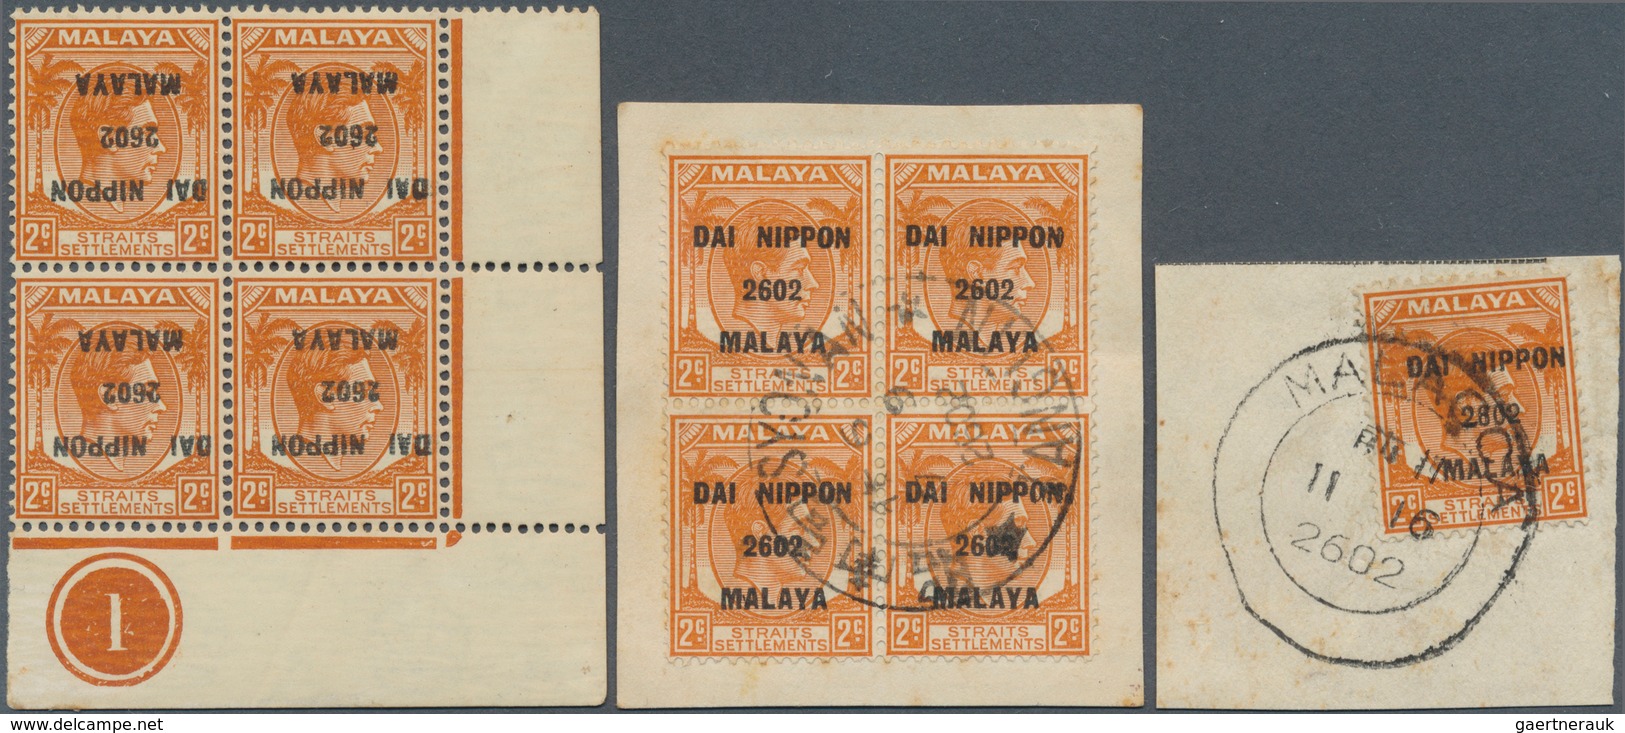 05537 Malaiische Staaten - Straits Settlements: Japanese Occupation, General Issues, 1942, KGVI Ovpt. "Dai - Straits Settlements